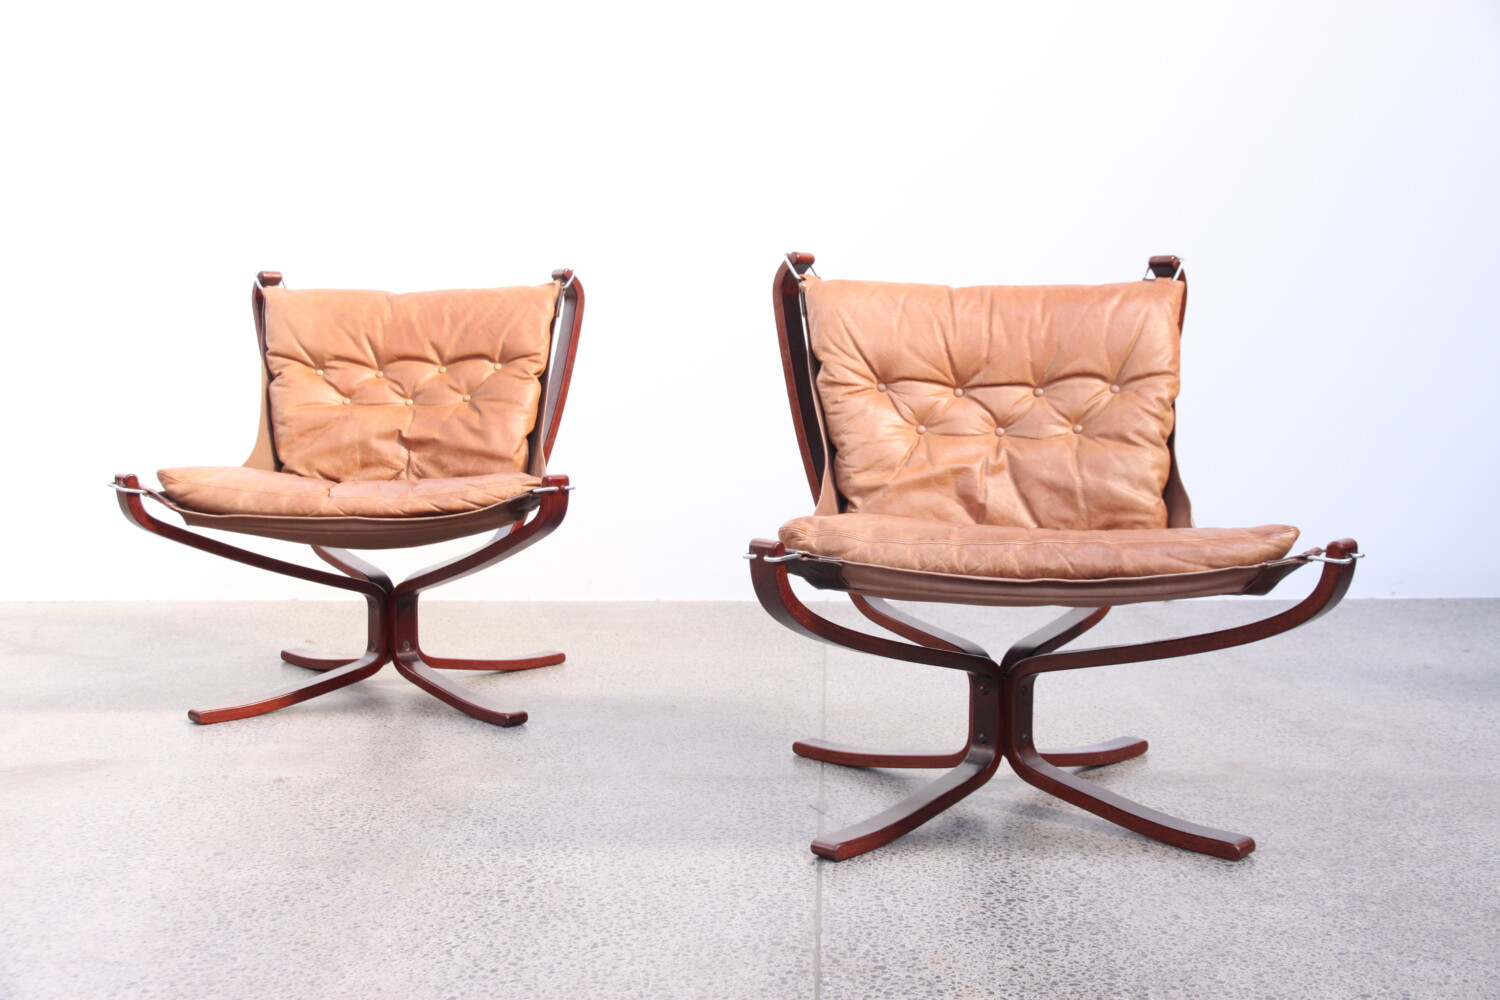 Pair of Falcon Chairs